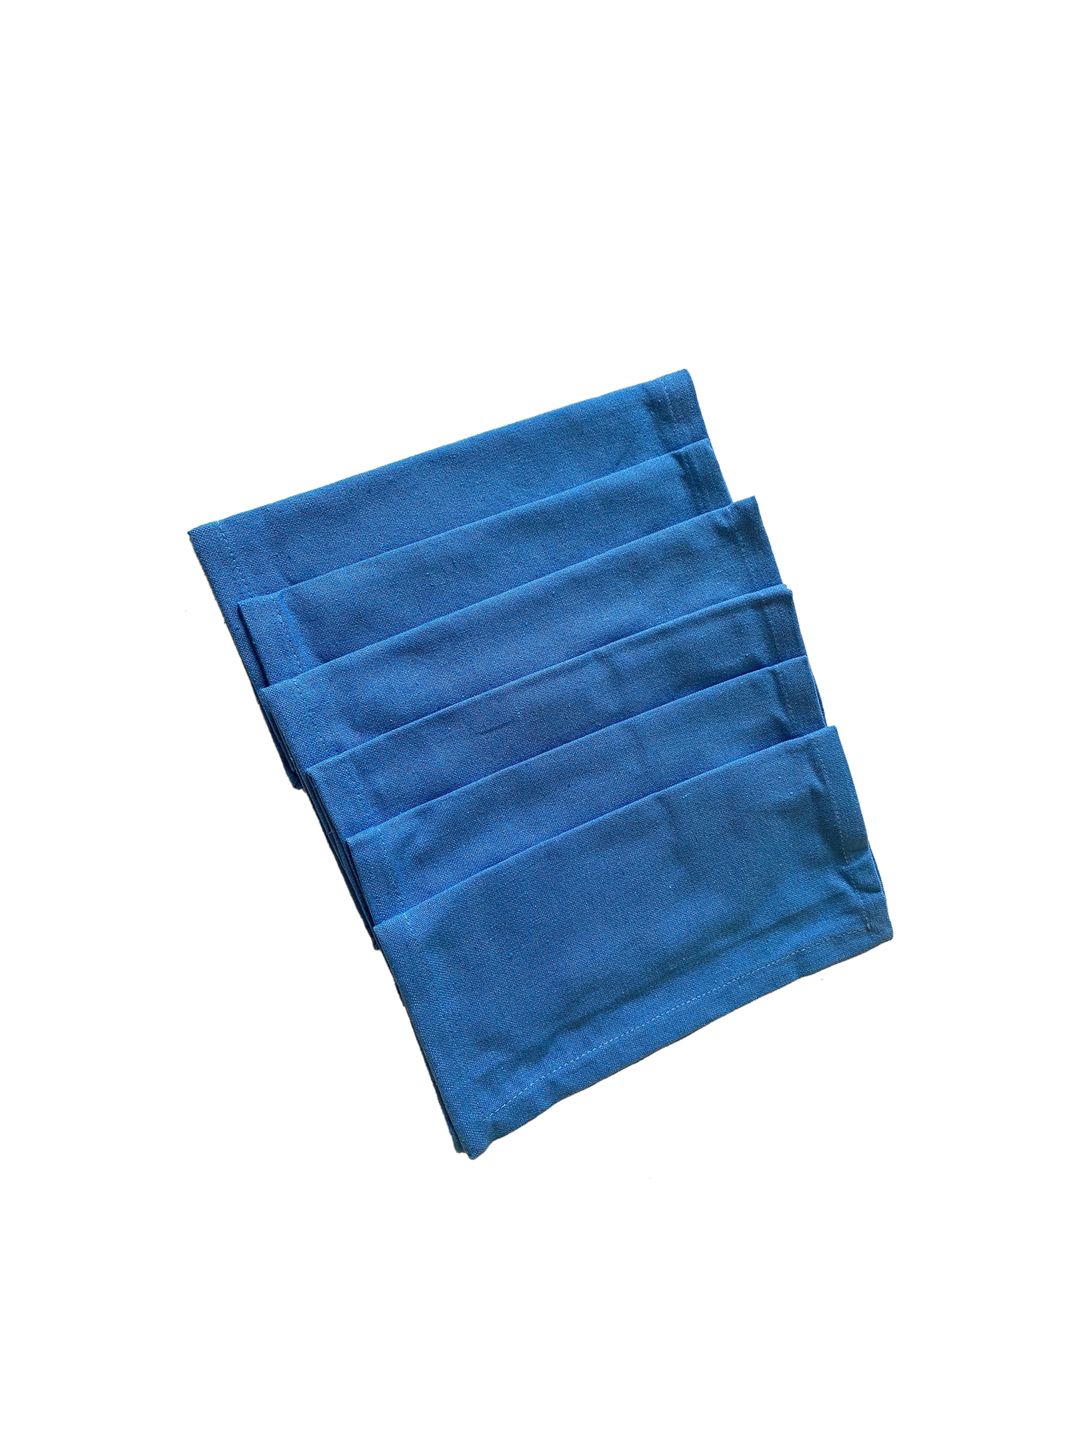 Lushomes Set of 6 Blue Solid Table Napkins Price in India